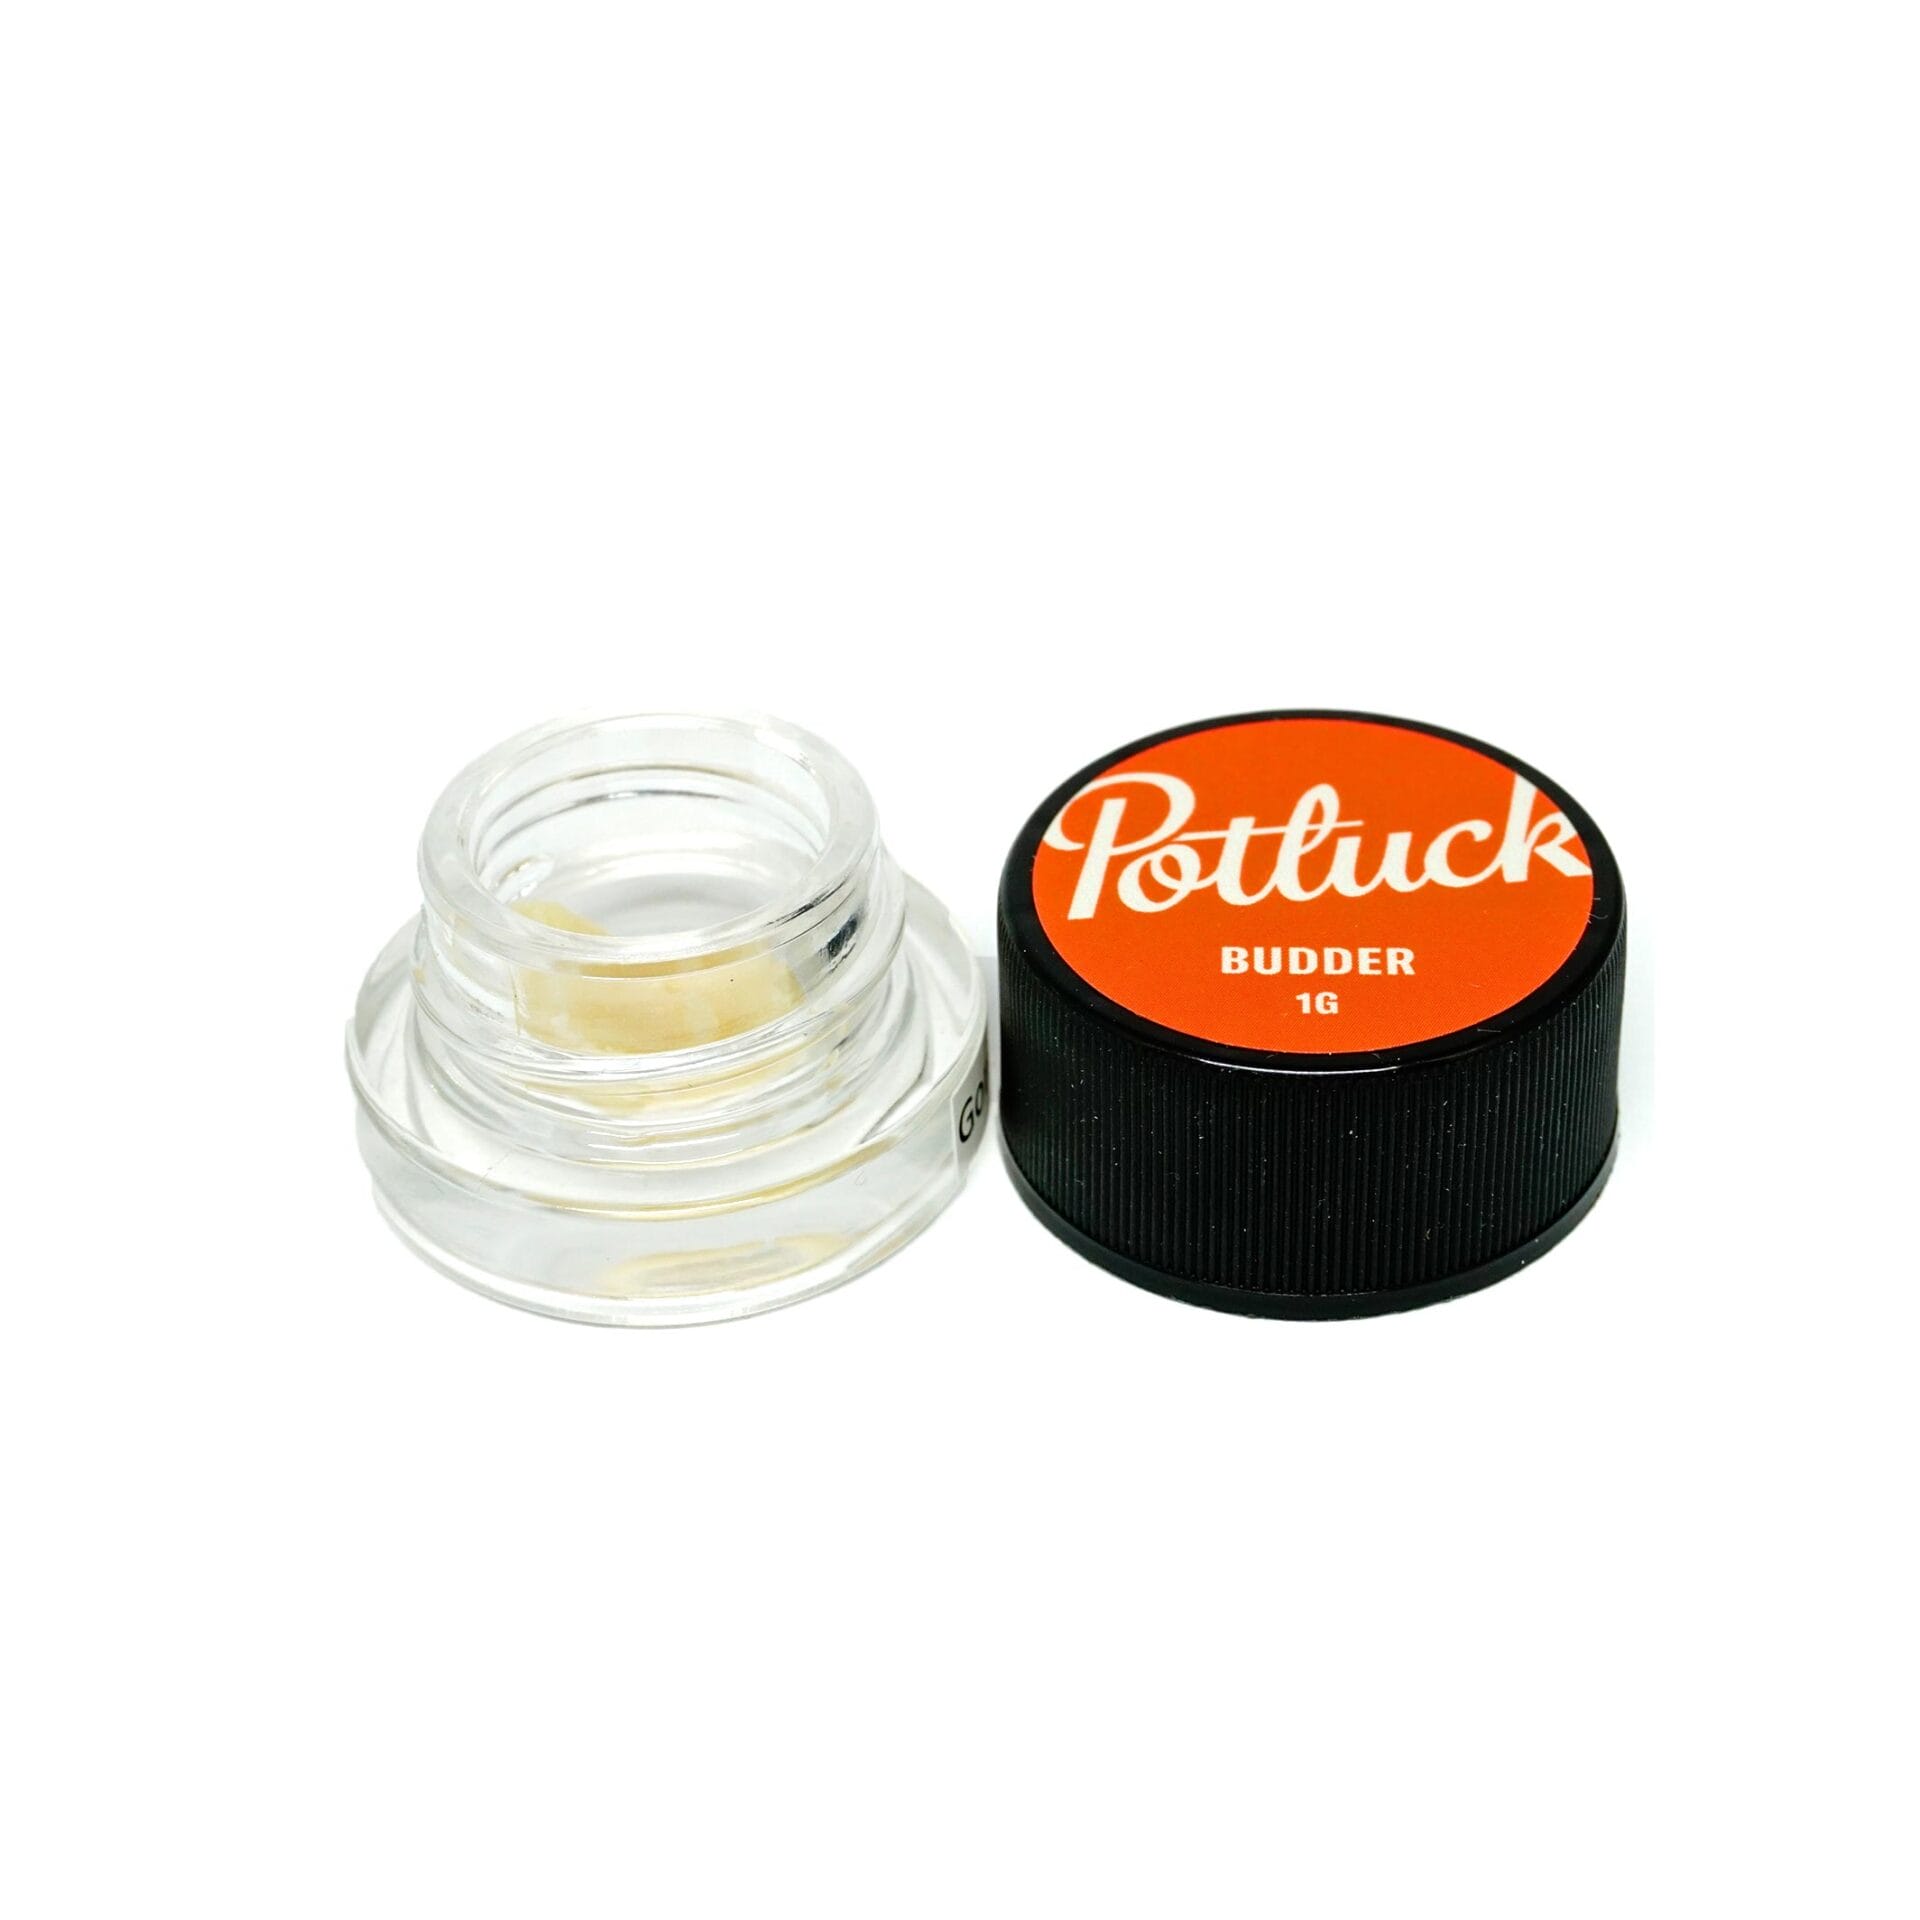 Potluck – Budder – Girl Scout Cookies